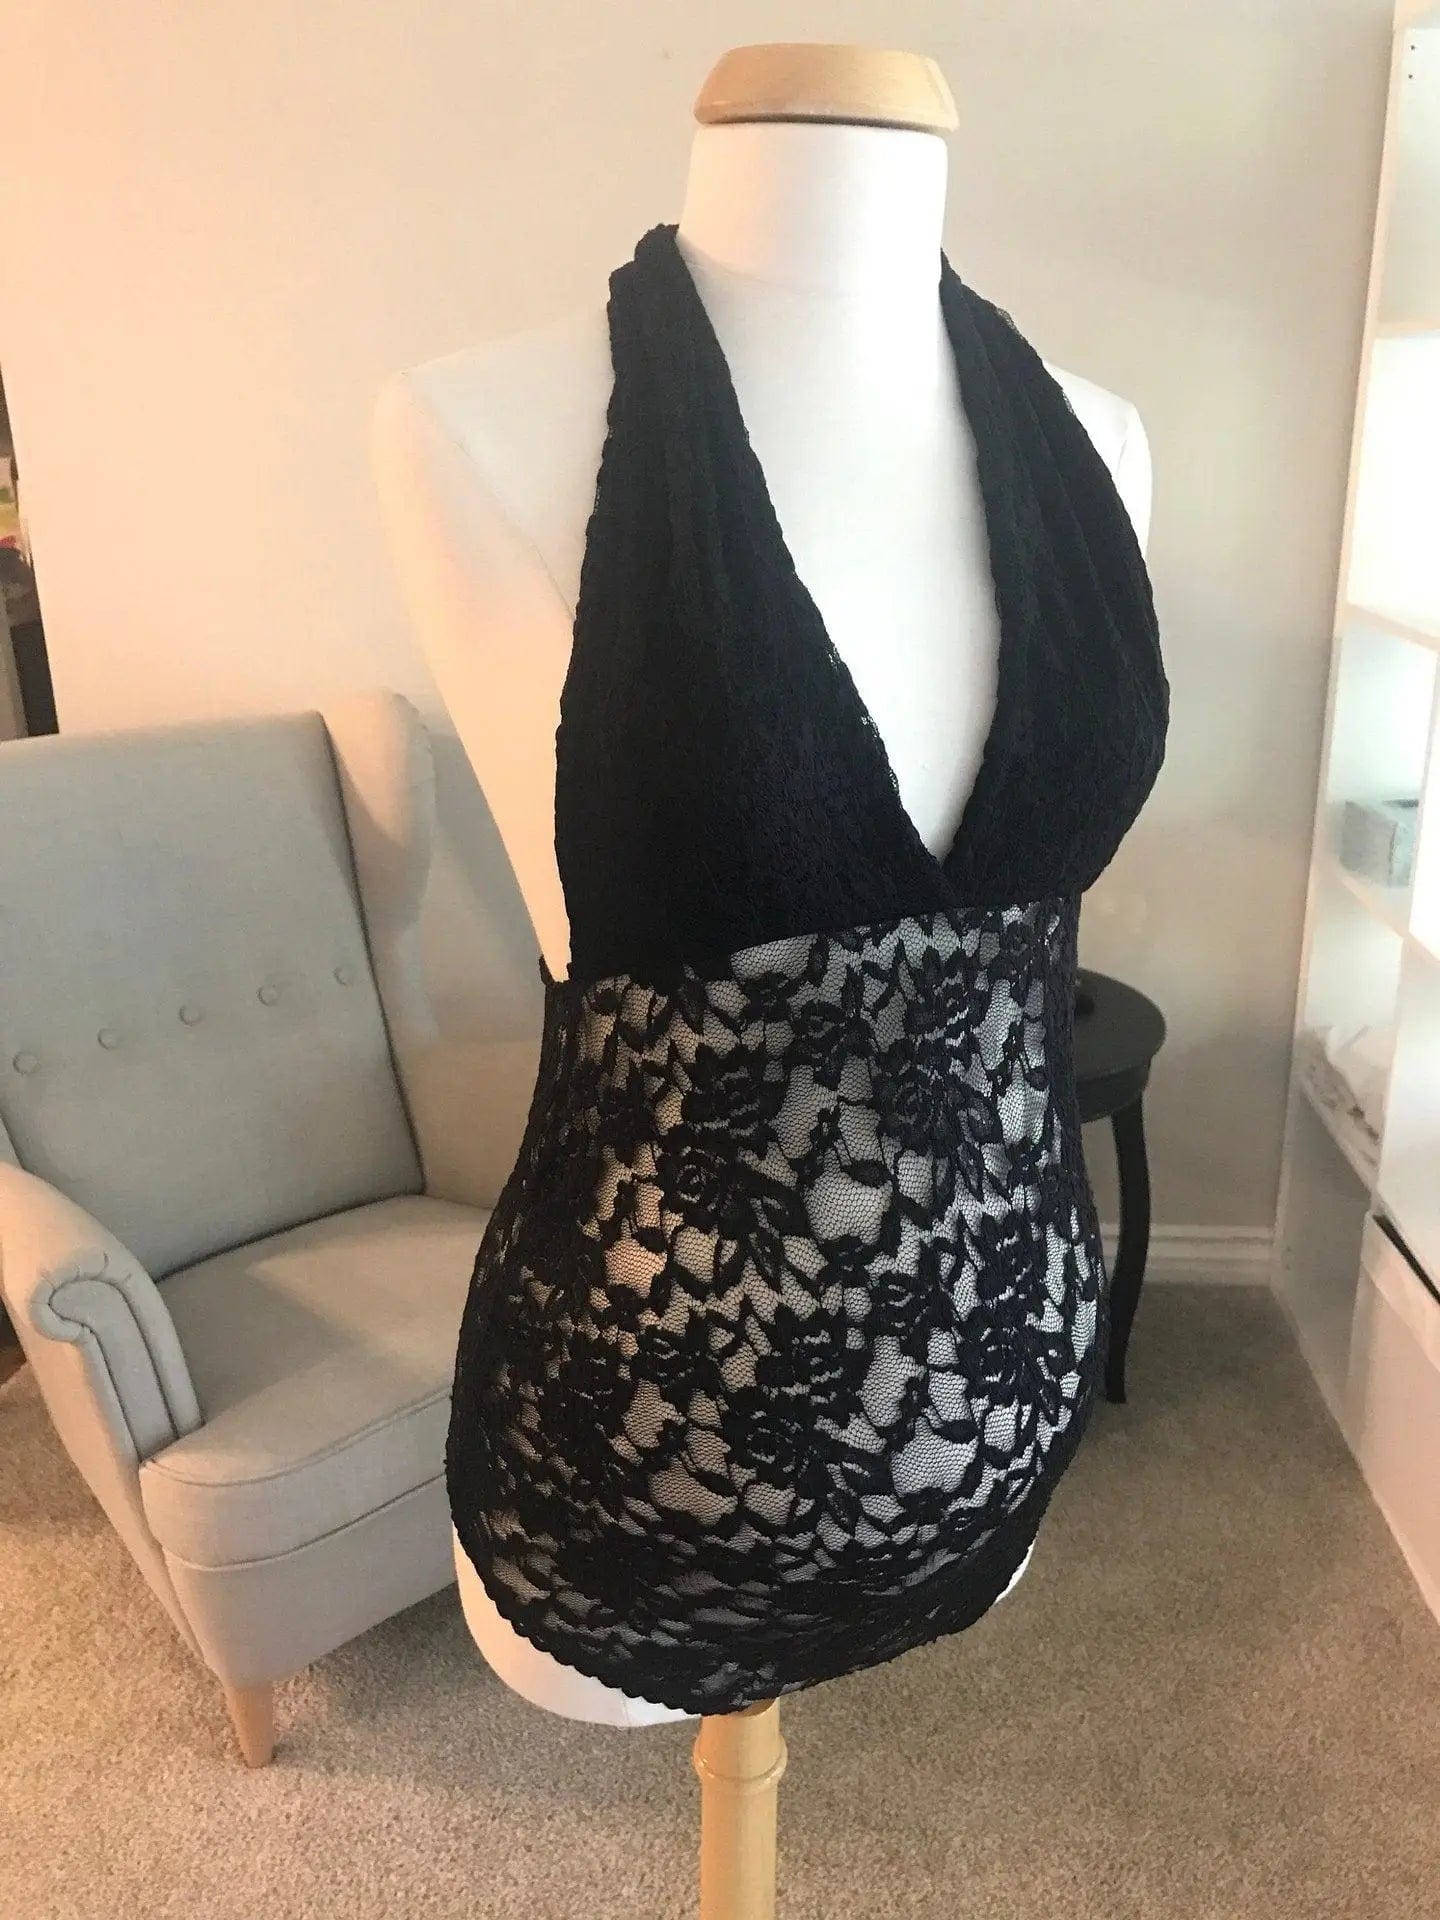 LOVEMI  Bodysuit Black / XL Lovemi -  New Style Sexy Lingerie Sexy hanging neck lace backless